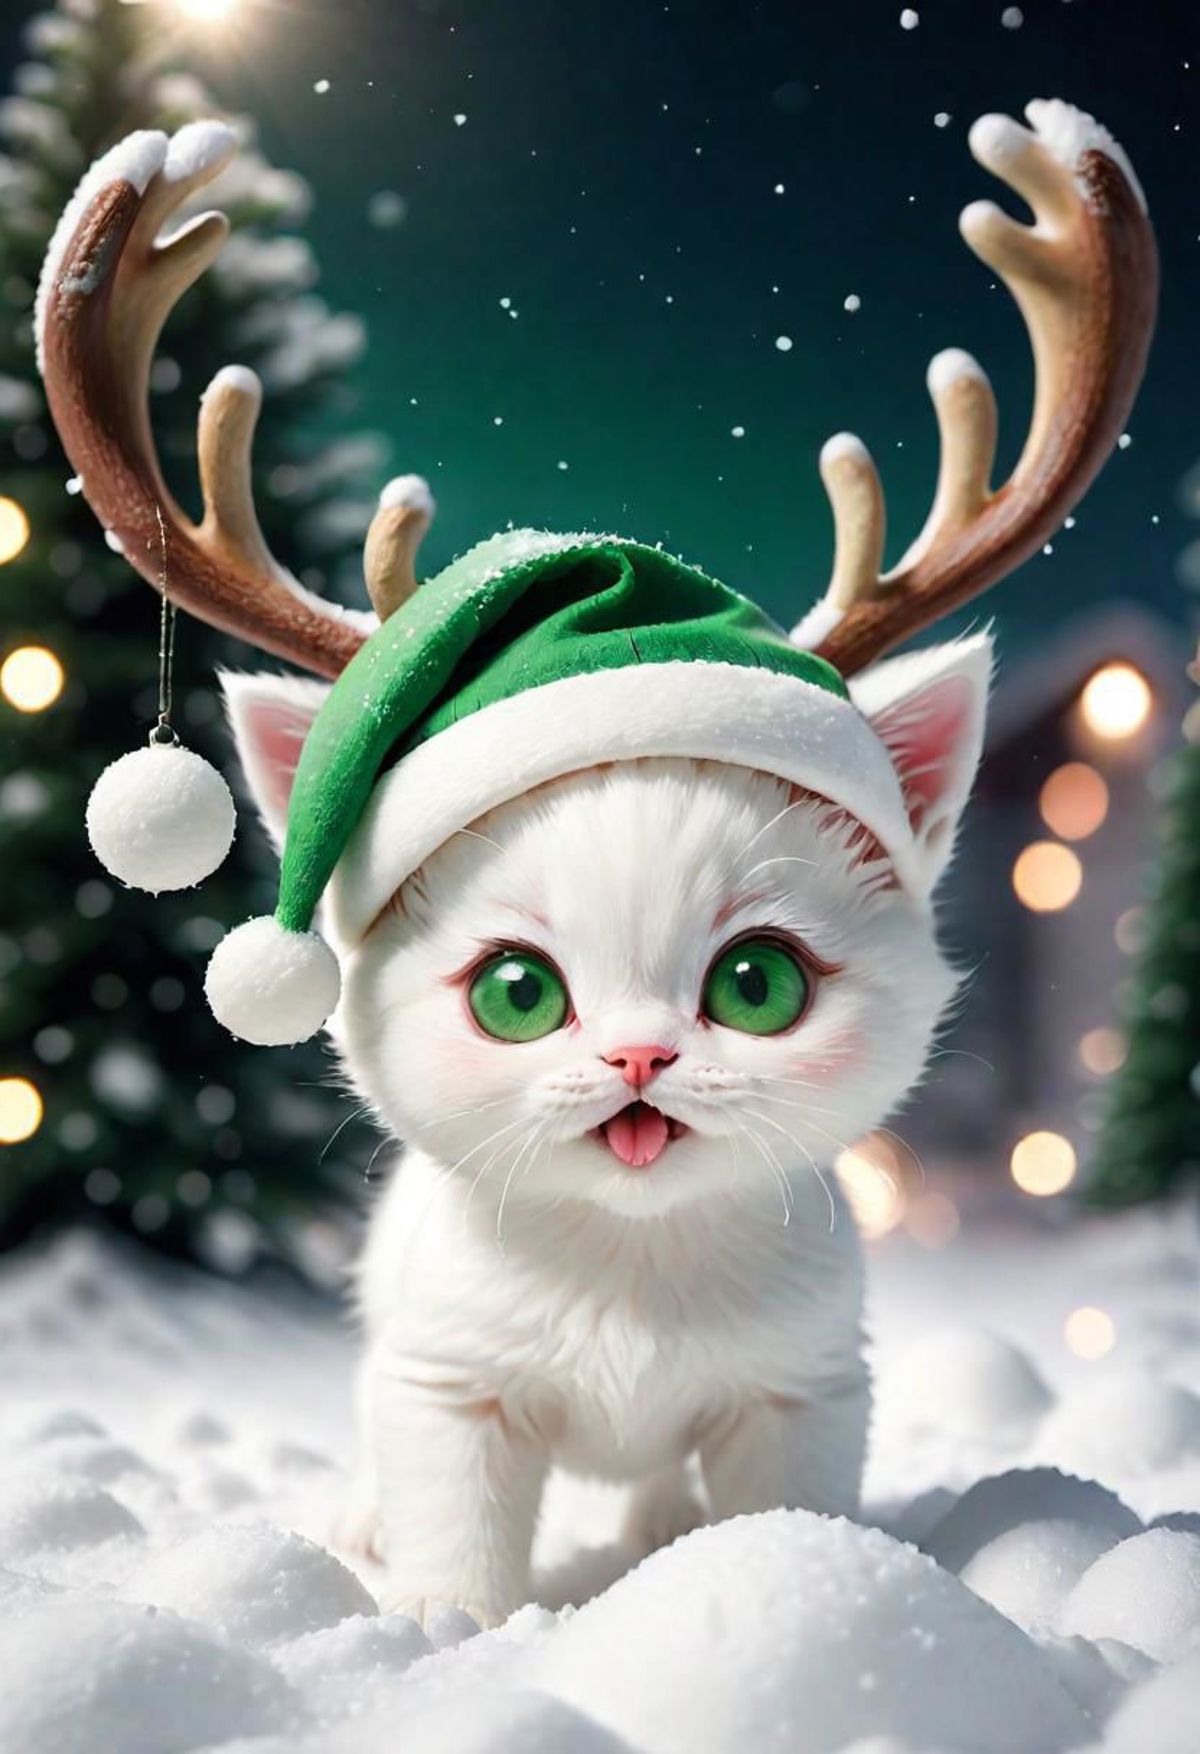 A white kitten wearing a green and white Santa hat and antlers.